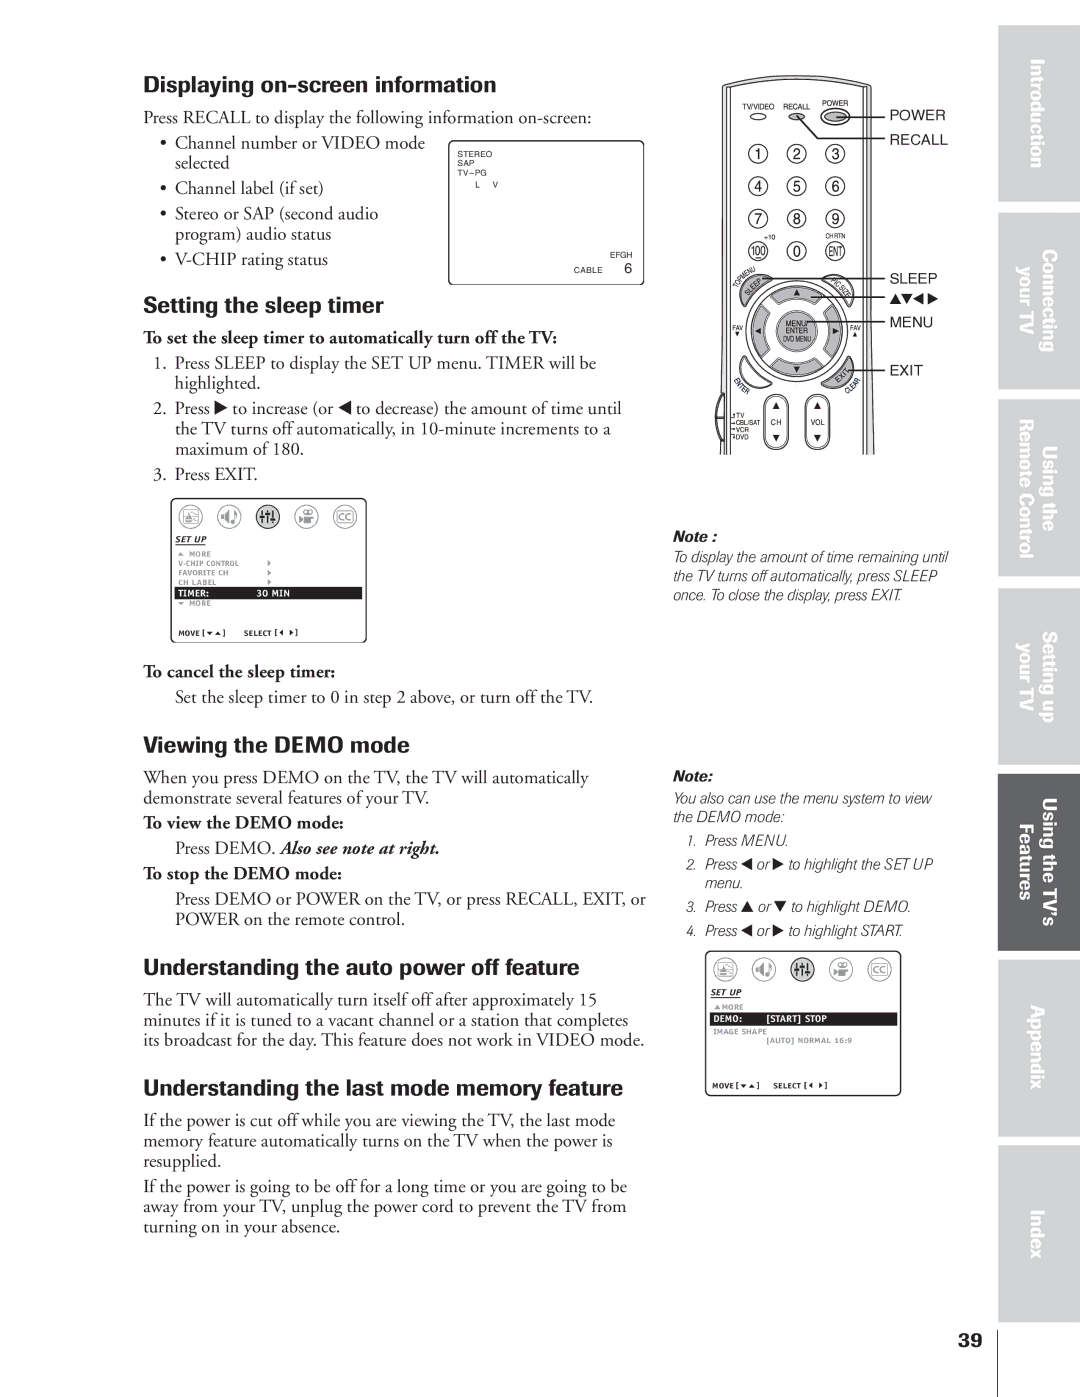 Toshiba 32AF14 owner manual Displaying on-screen information, Setting the sleep timer, Viewing the Demo mode 